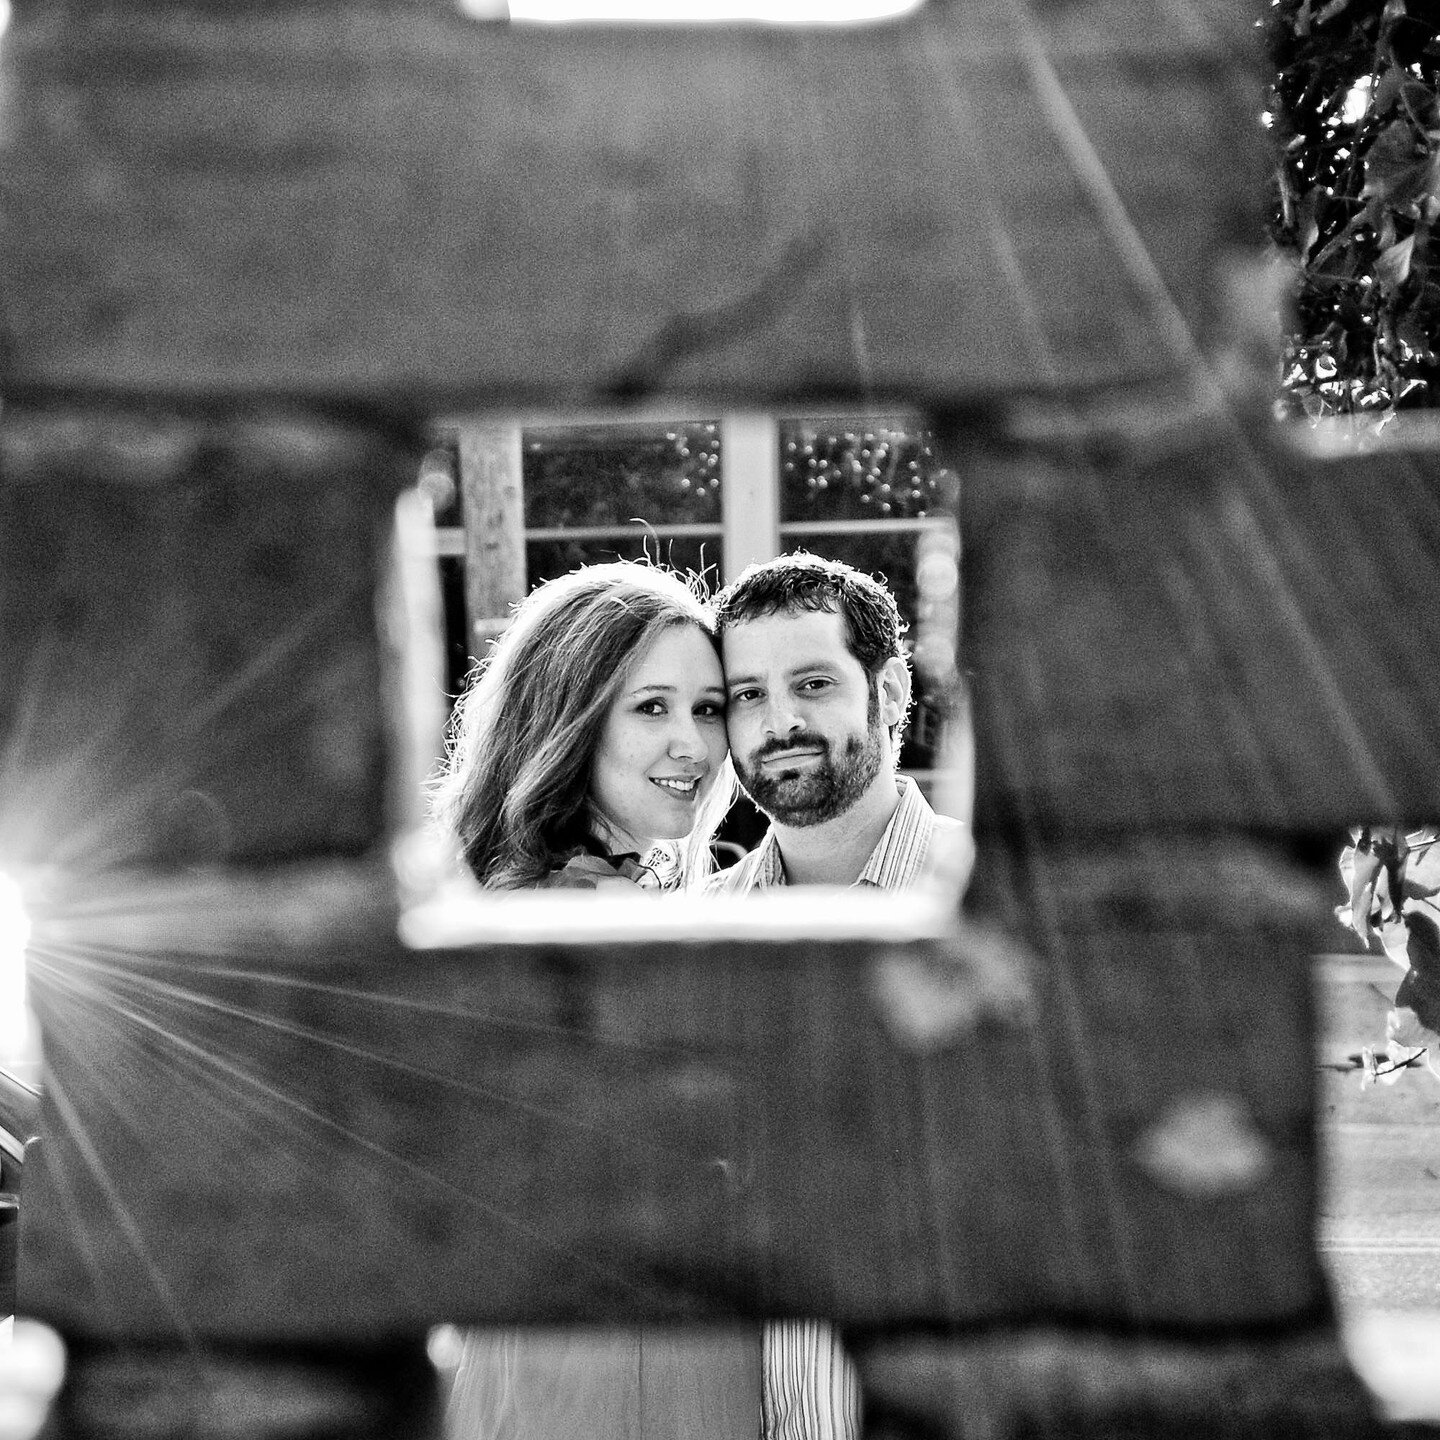 Engagement session, several years ago. Took this shot in downtown Wilmington, NC. I like the kinda looking-through-the-keyhole effect. Great couple, the wedding the following year was fantastic!

#wilmingtonncphotographer #wilmingtonweddings #wilming